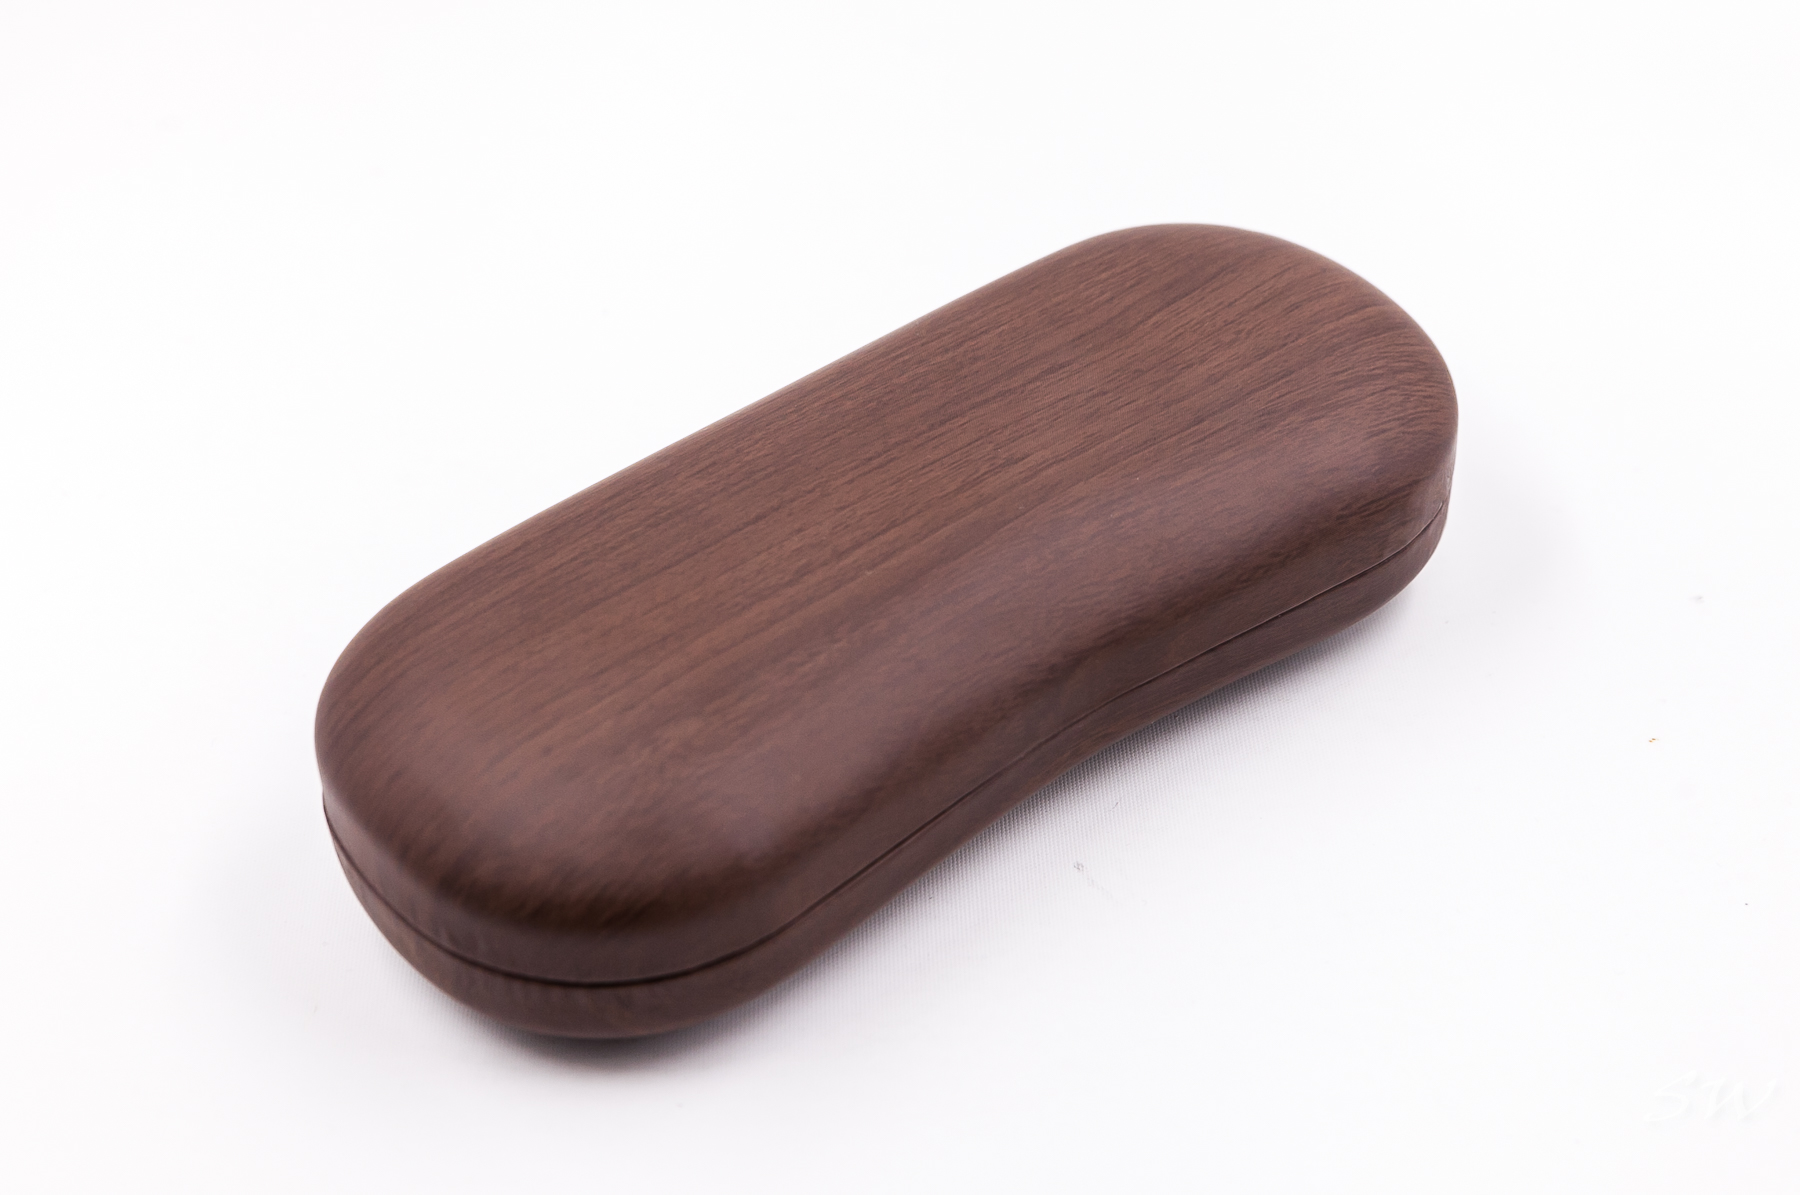 2021 Glasses Box Sunglasses The Texture of Wood Grain Is Smooth